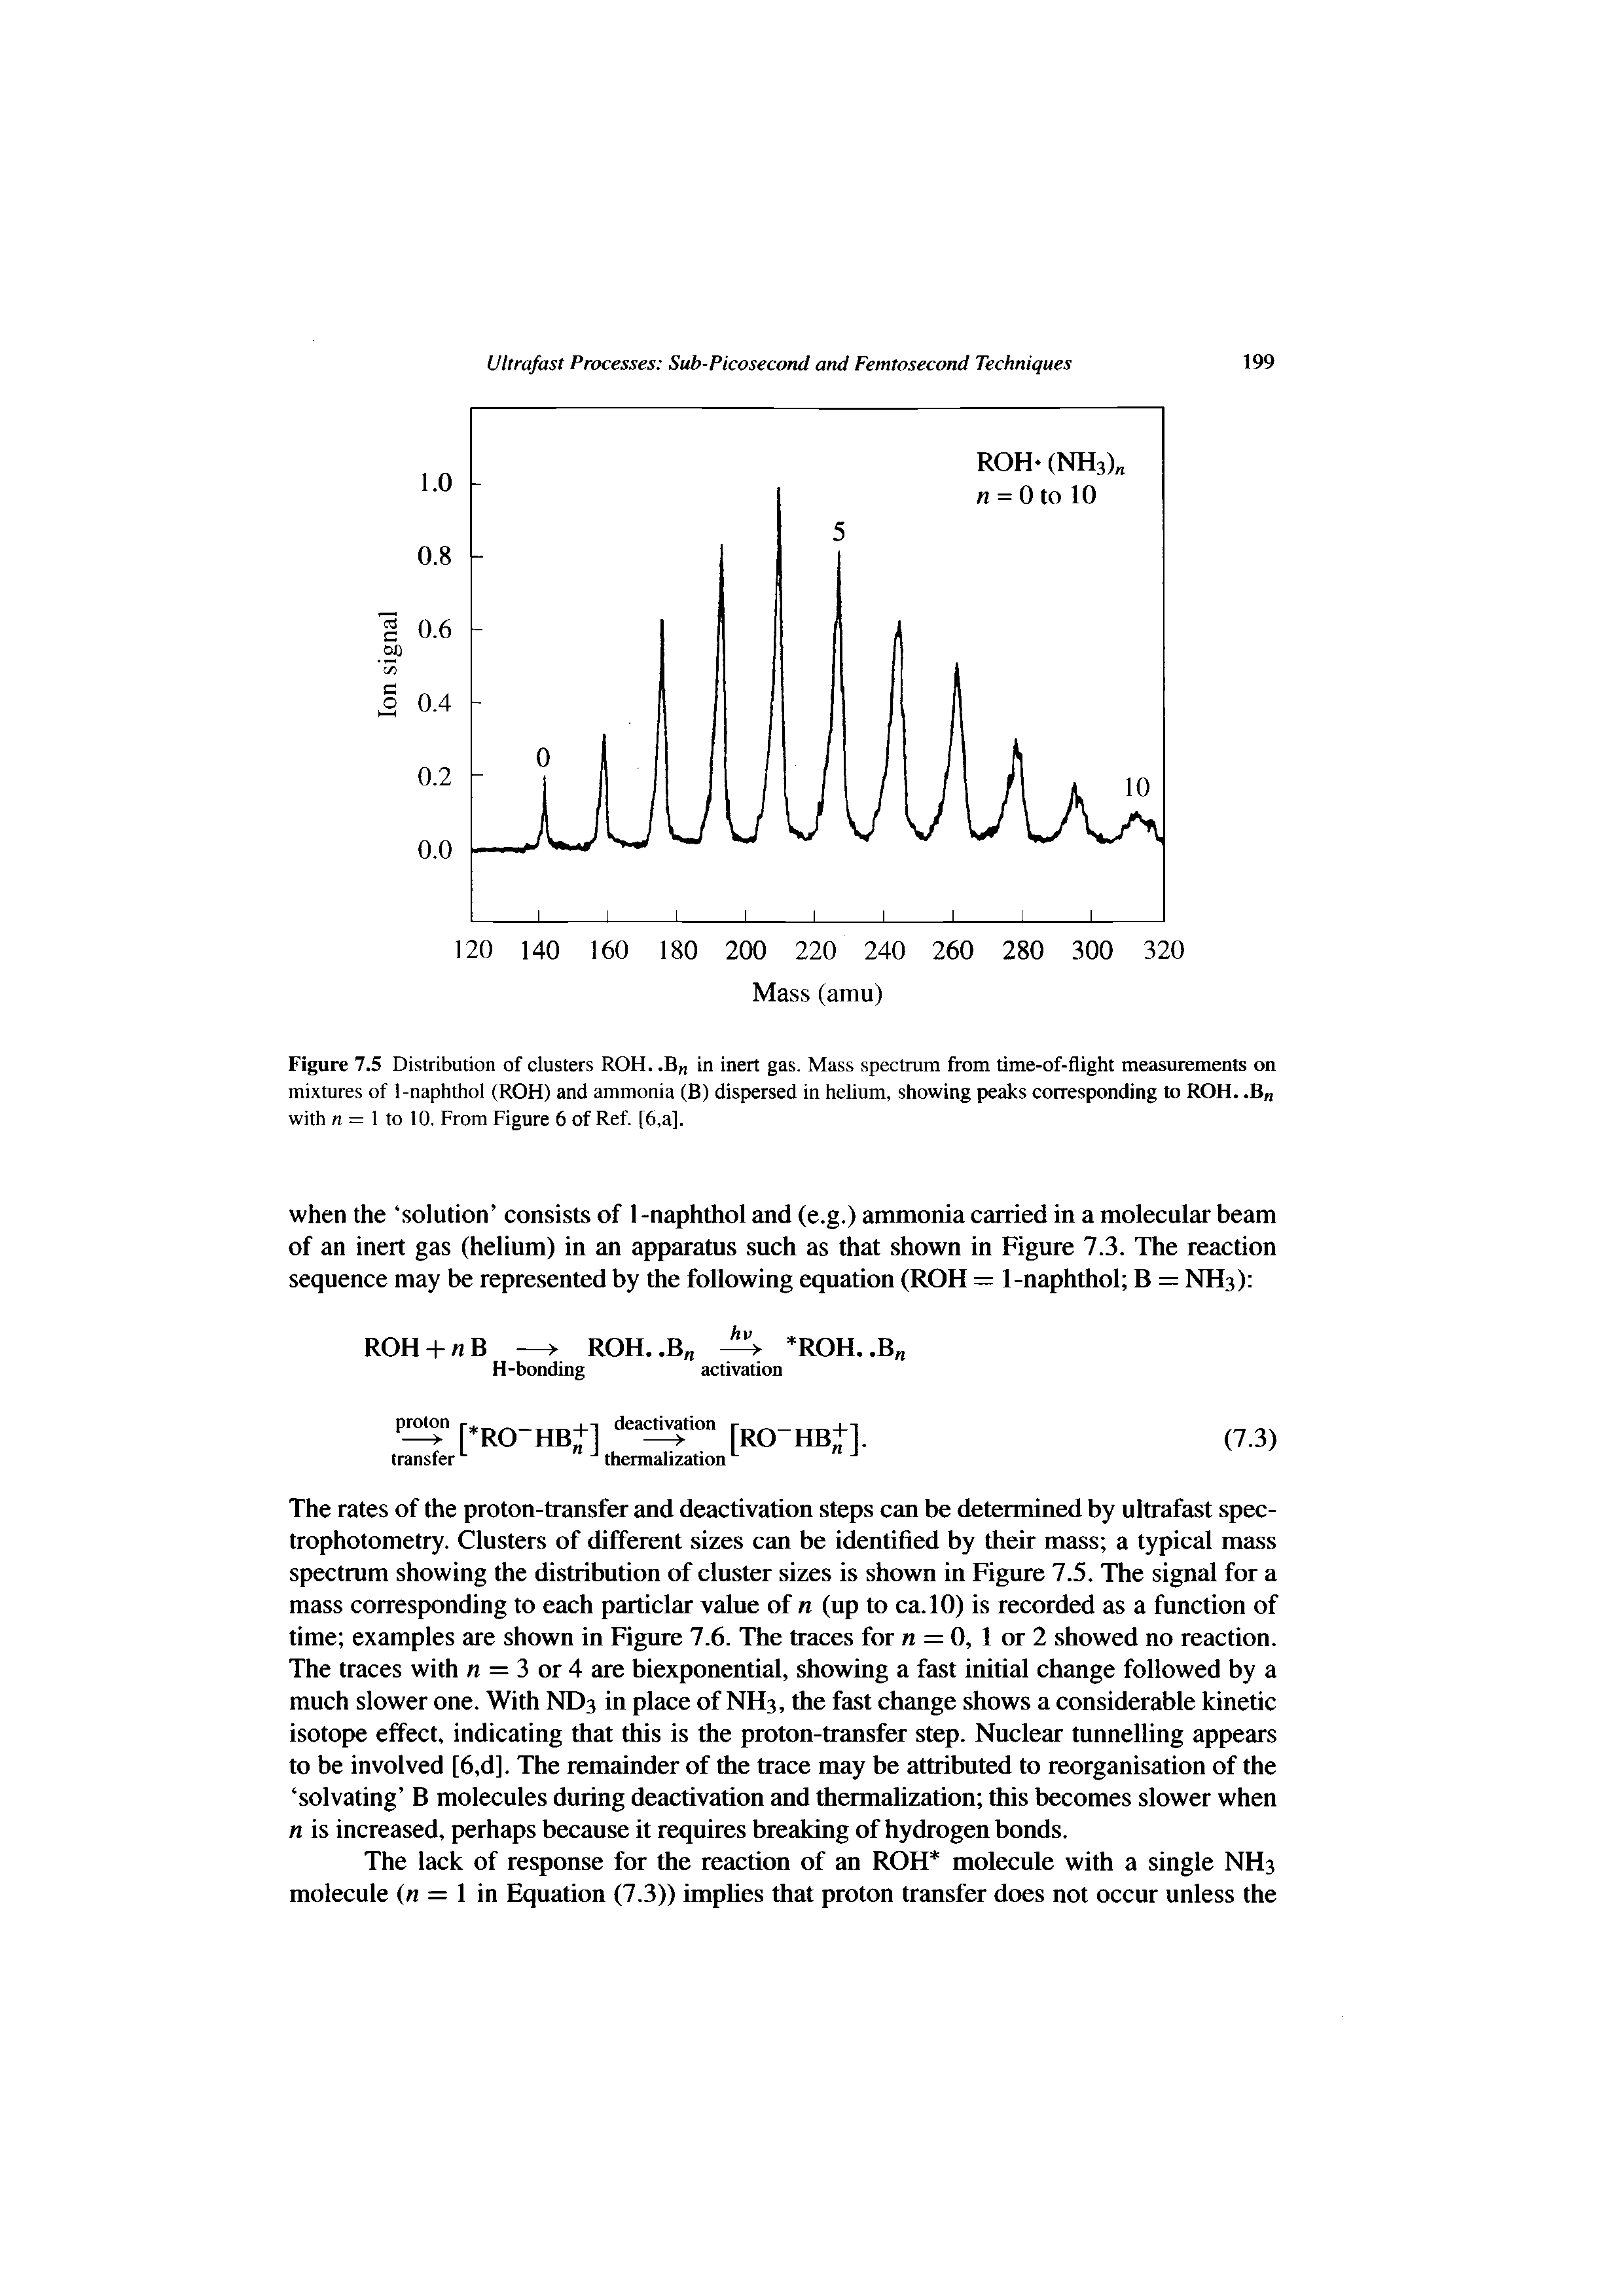 Figure 7.5 Distribution of clusters ROH.. Bn in inert gas. Mass spectrum from time-of-flight measurements on mixtures of 1-naphthol (ROH) and ammonia (B) dispersed in helium, showing peaks corresponding to ROH.. B with n = 1 to 10. From Figure 6 of Ref. [6,a].